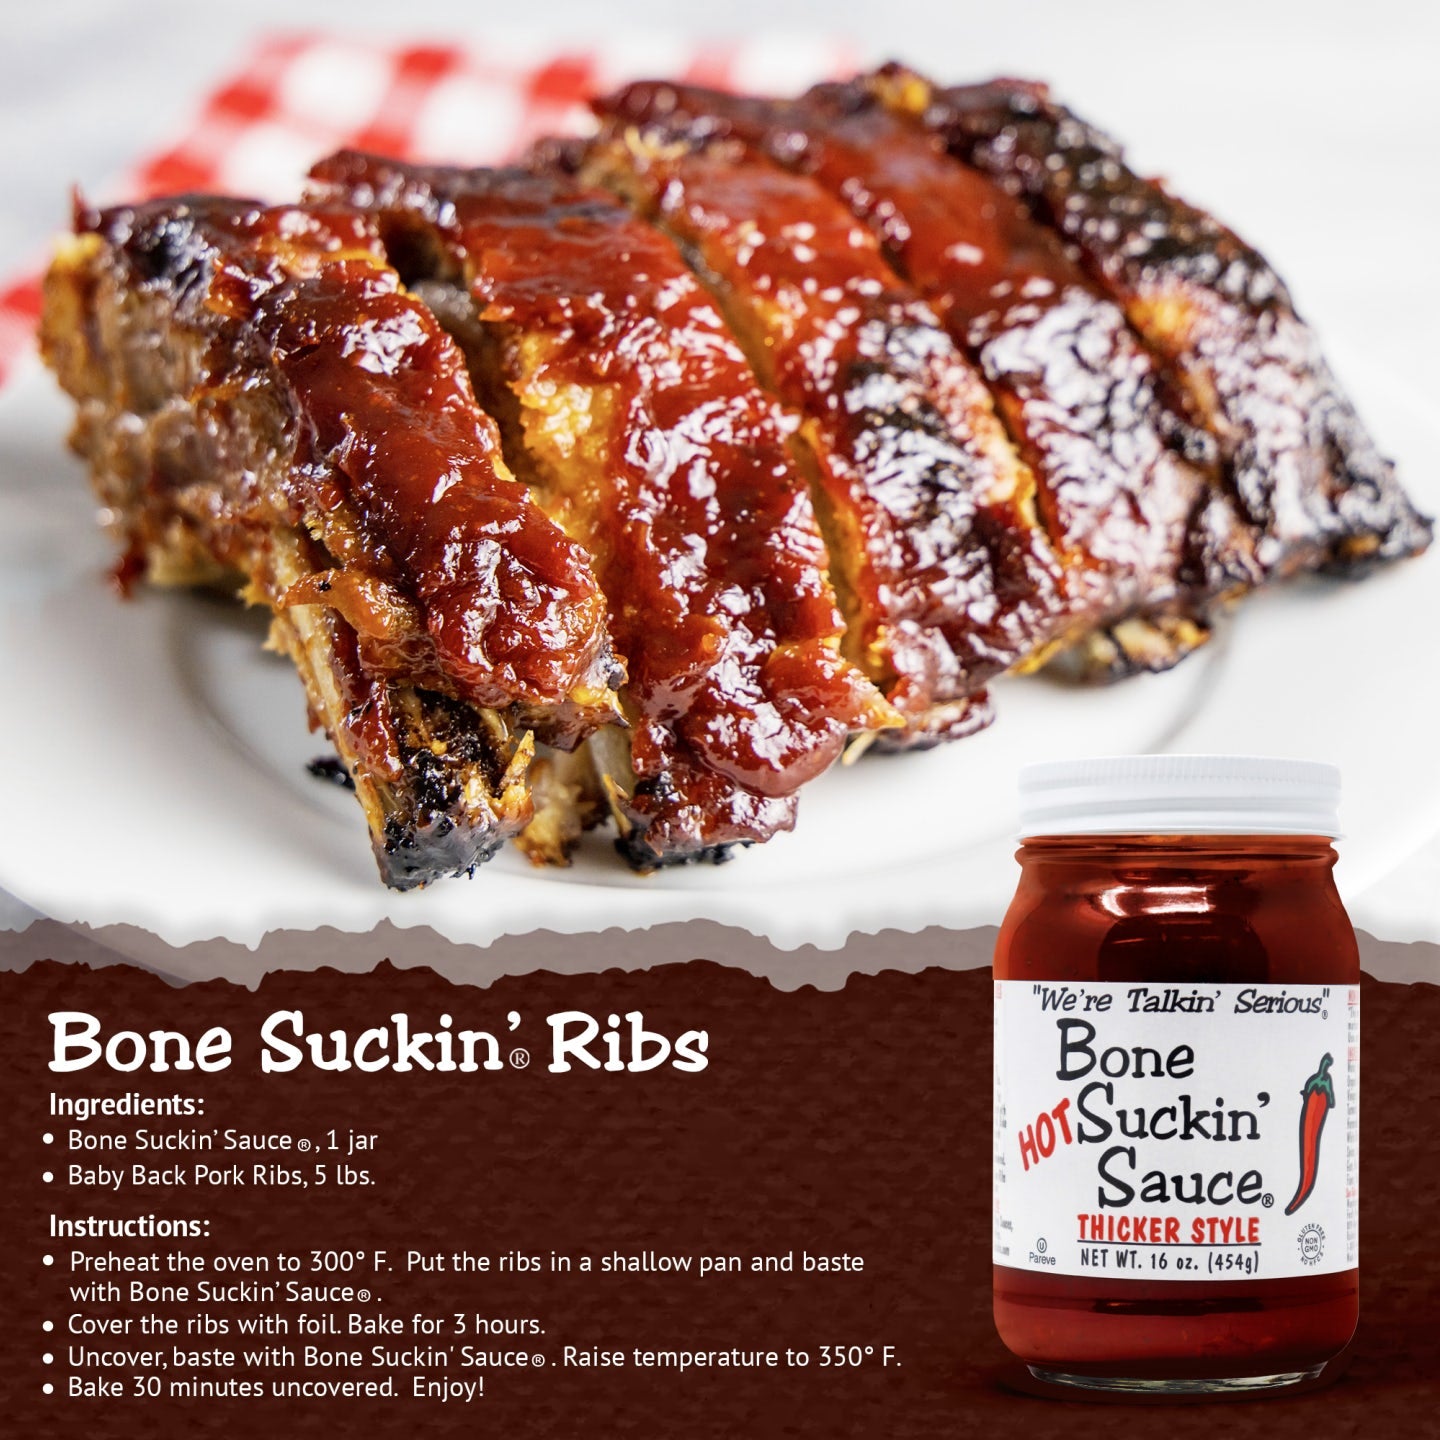 Bone Suckin’® Ribs Recipe | Bone Suckin' Sauce®, 1 jar Baby Back Pork Ribs, 5 lbs. Preheat oven to 300 degrees. Put ribs in shallow pan and baste with sauce. Cover ribs with foil. Bake 3 hours. Uncover, baste with Sauce. Raise temperature to 350 degrees. Bake 30 minutes uncovered.